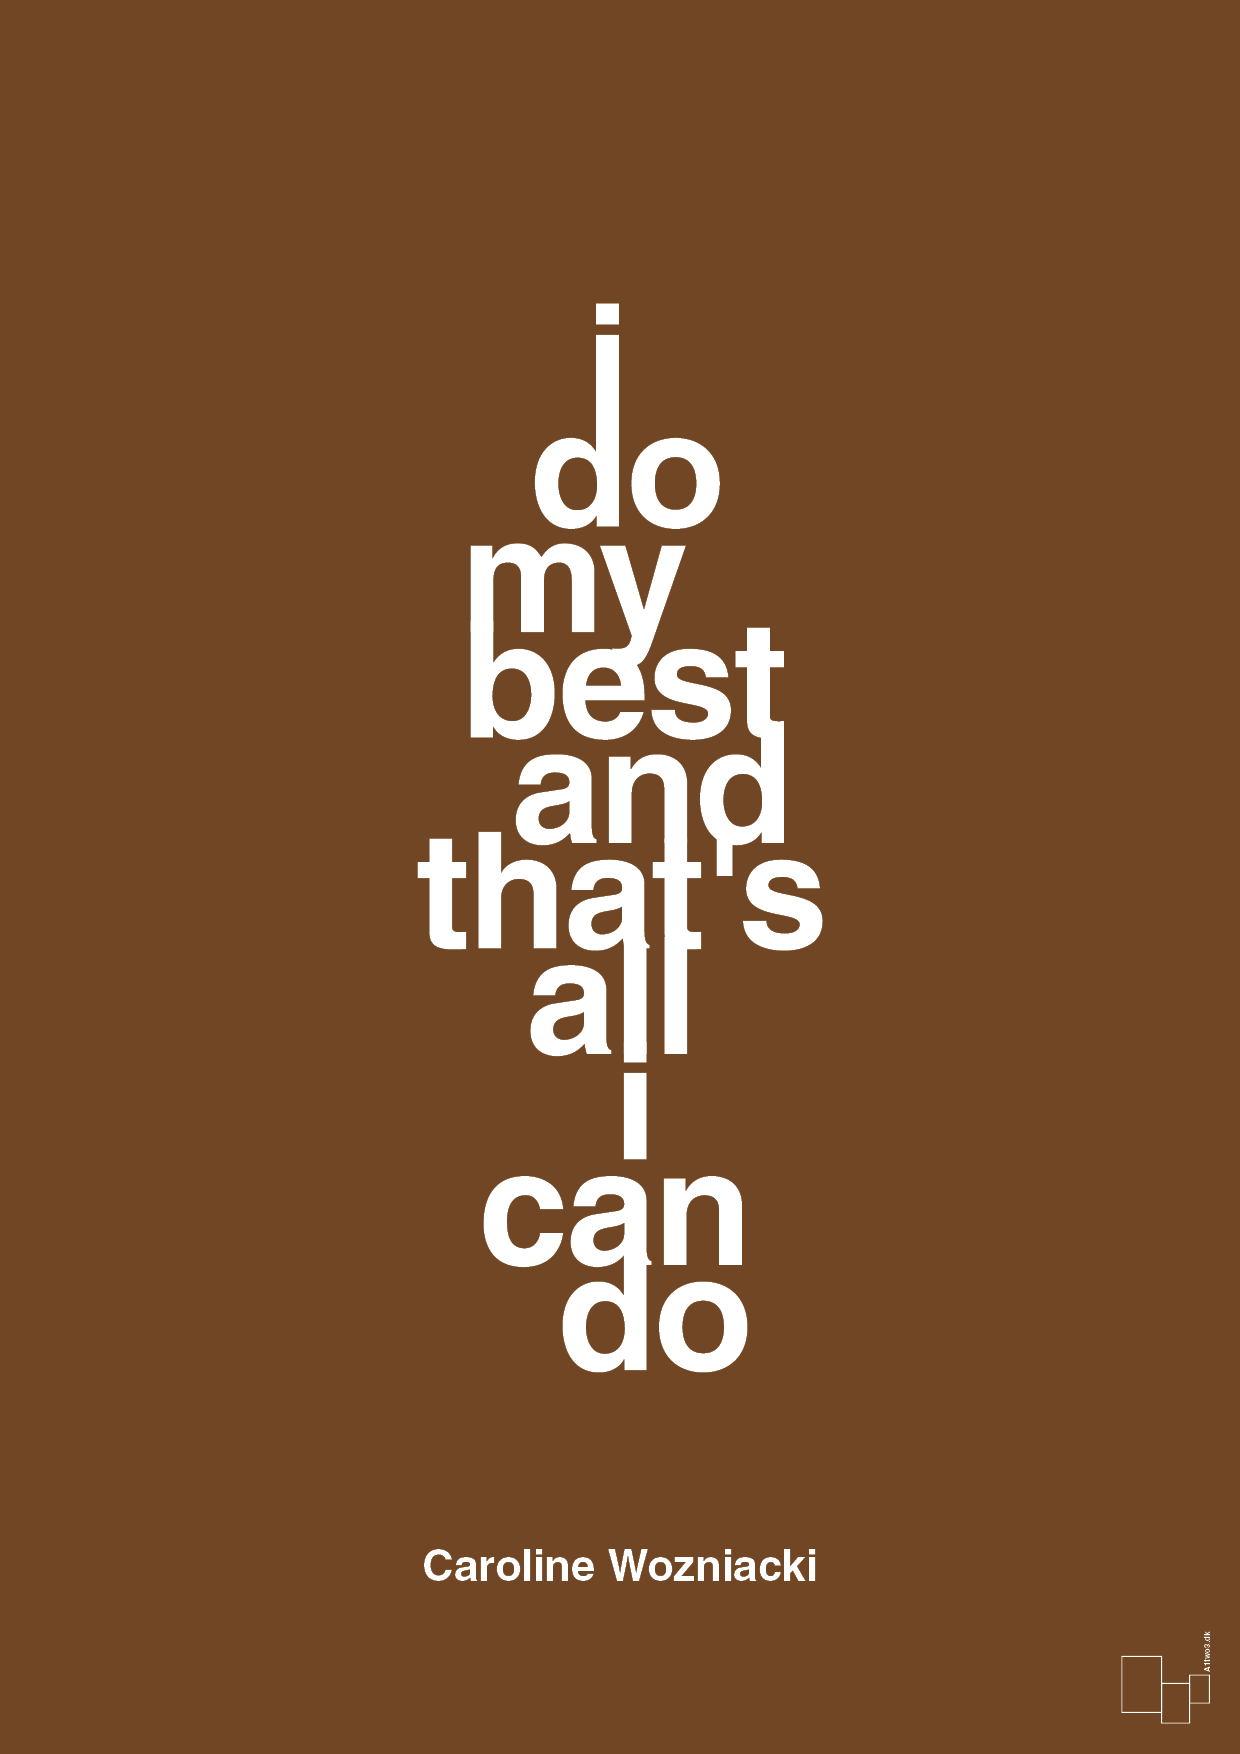 i do my best and that's all i can do - Plakat med Citater i Dark Brown